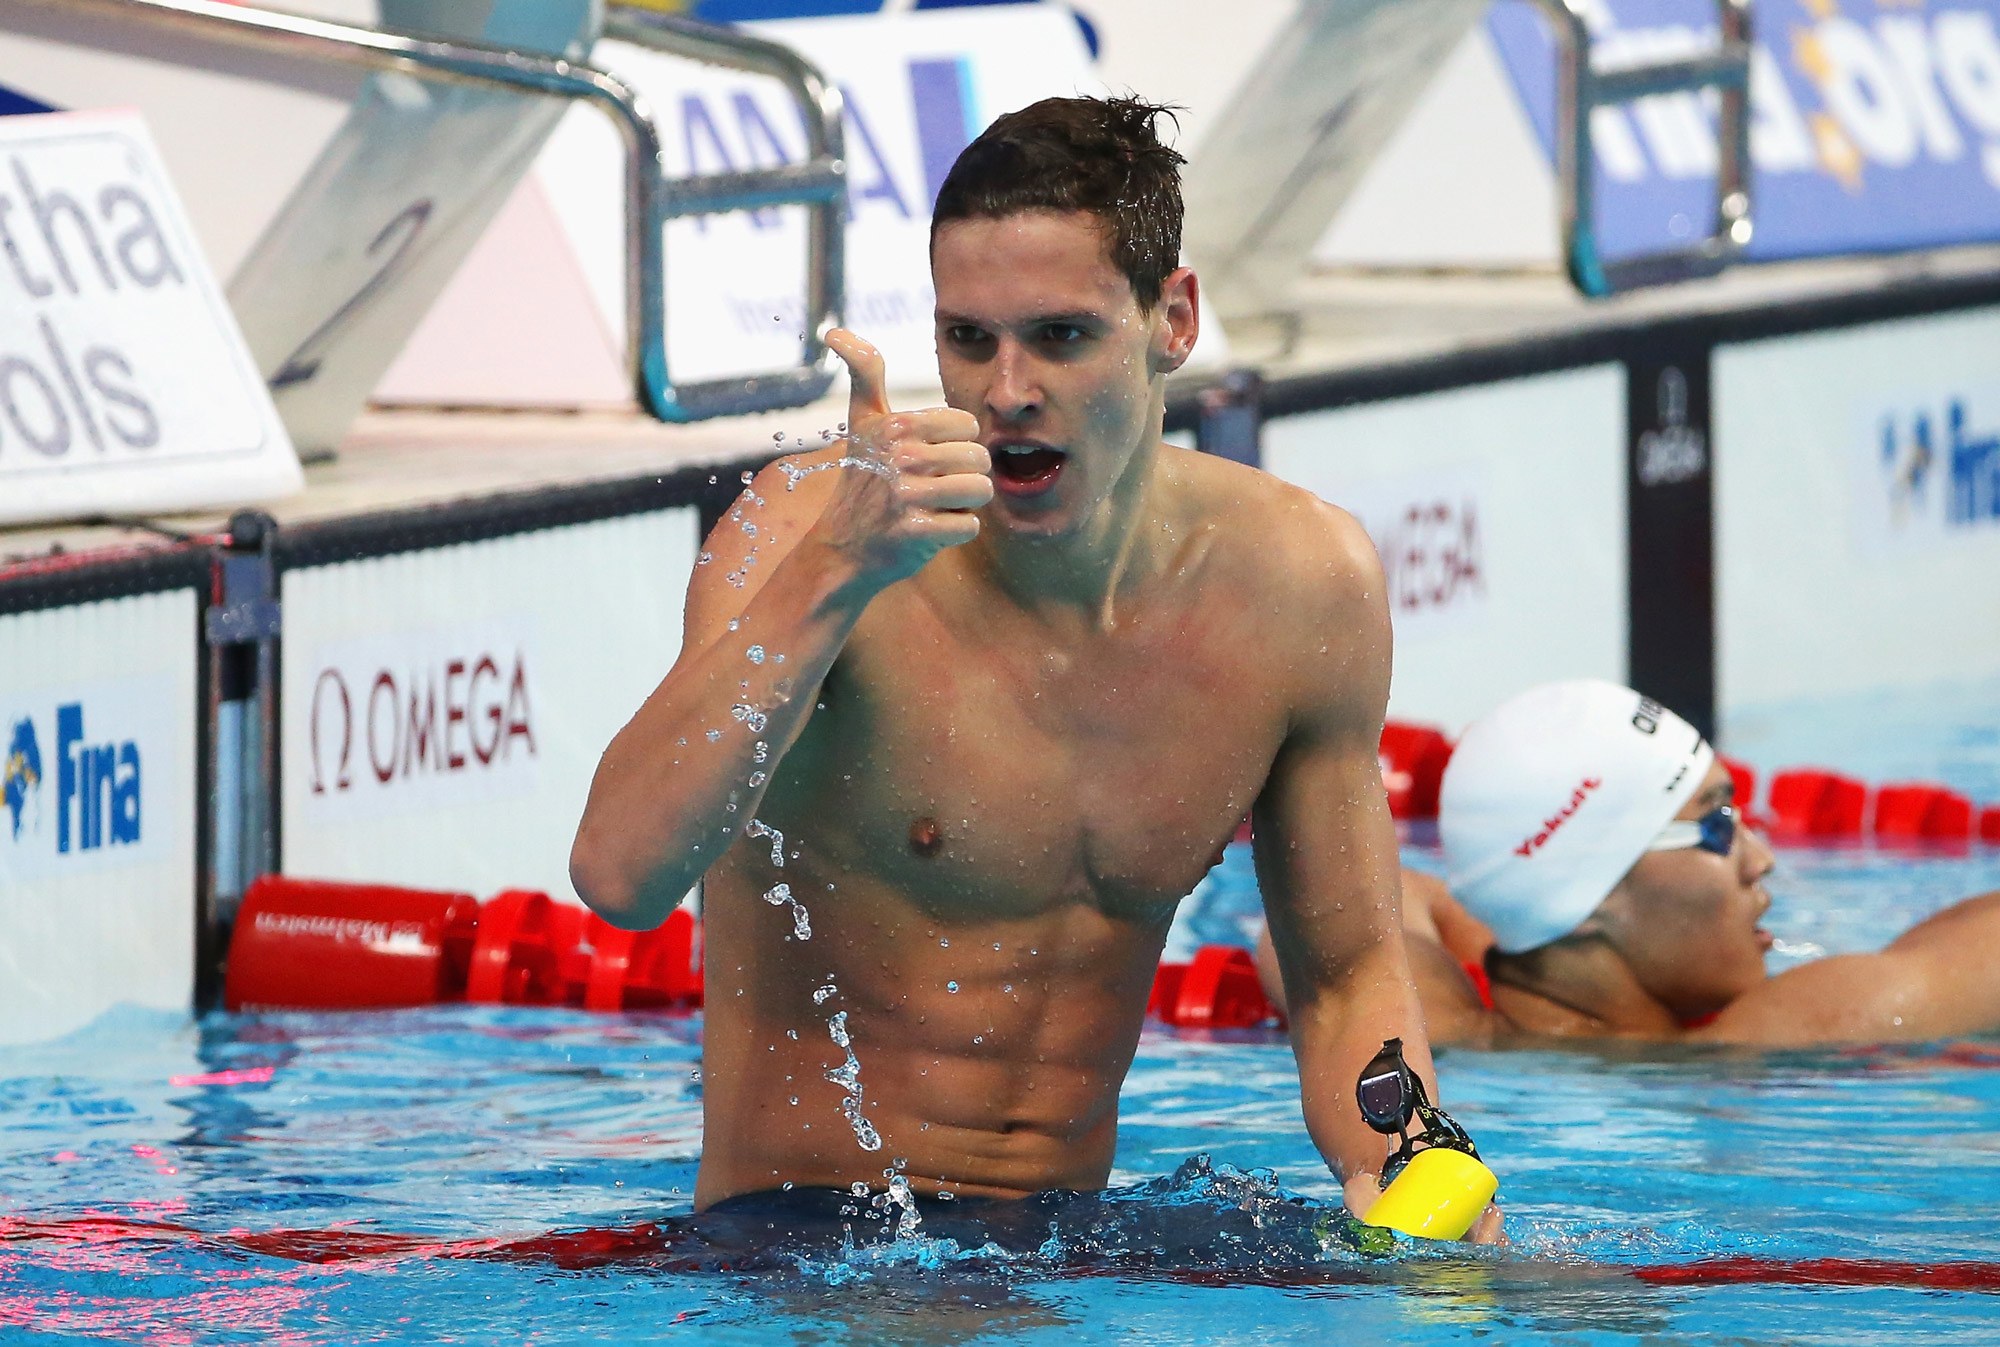 2016 Olympics: 12 Hot Olympic Swimmers to Watch at the Games - Vogue